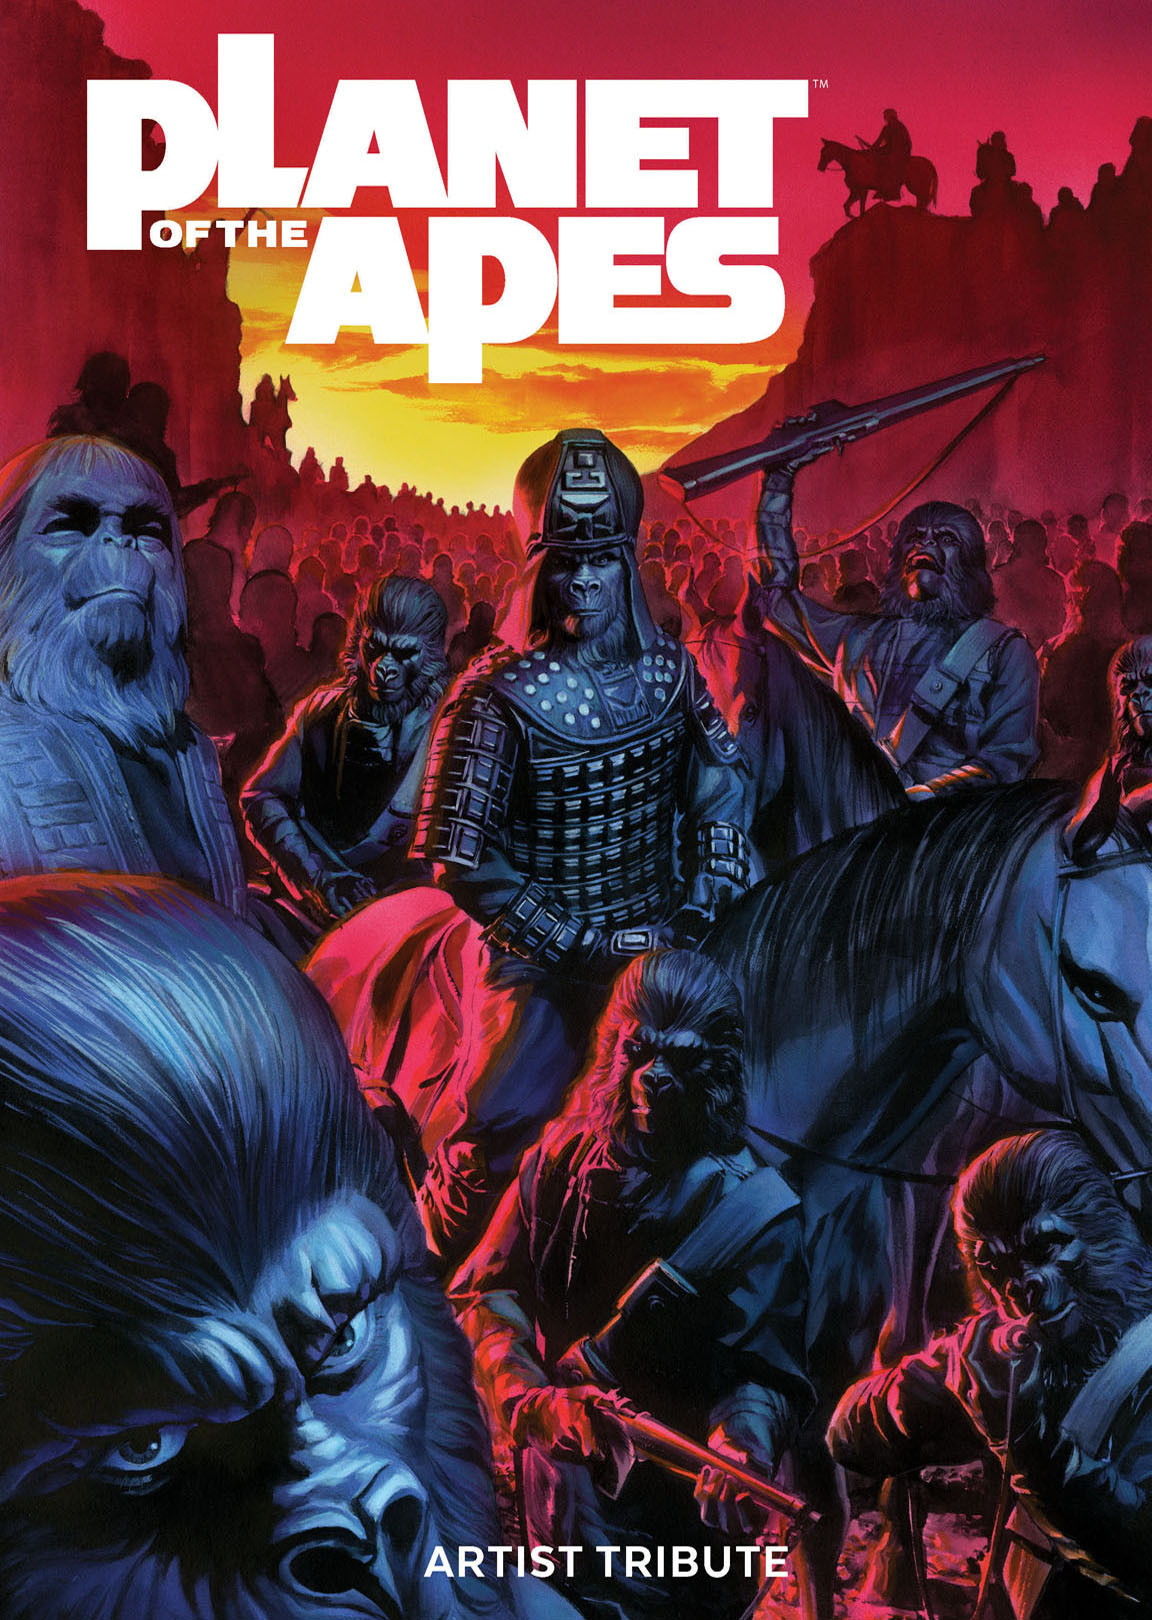 This image is the cover for the book Planet of the Apes Artist Tribute, Planet of the Apes